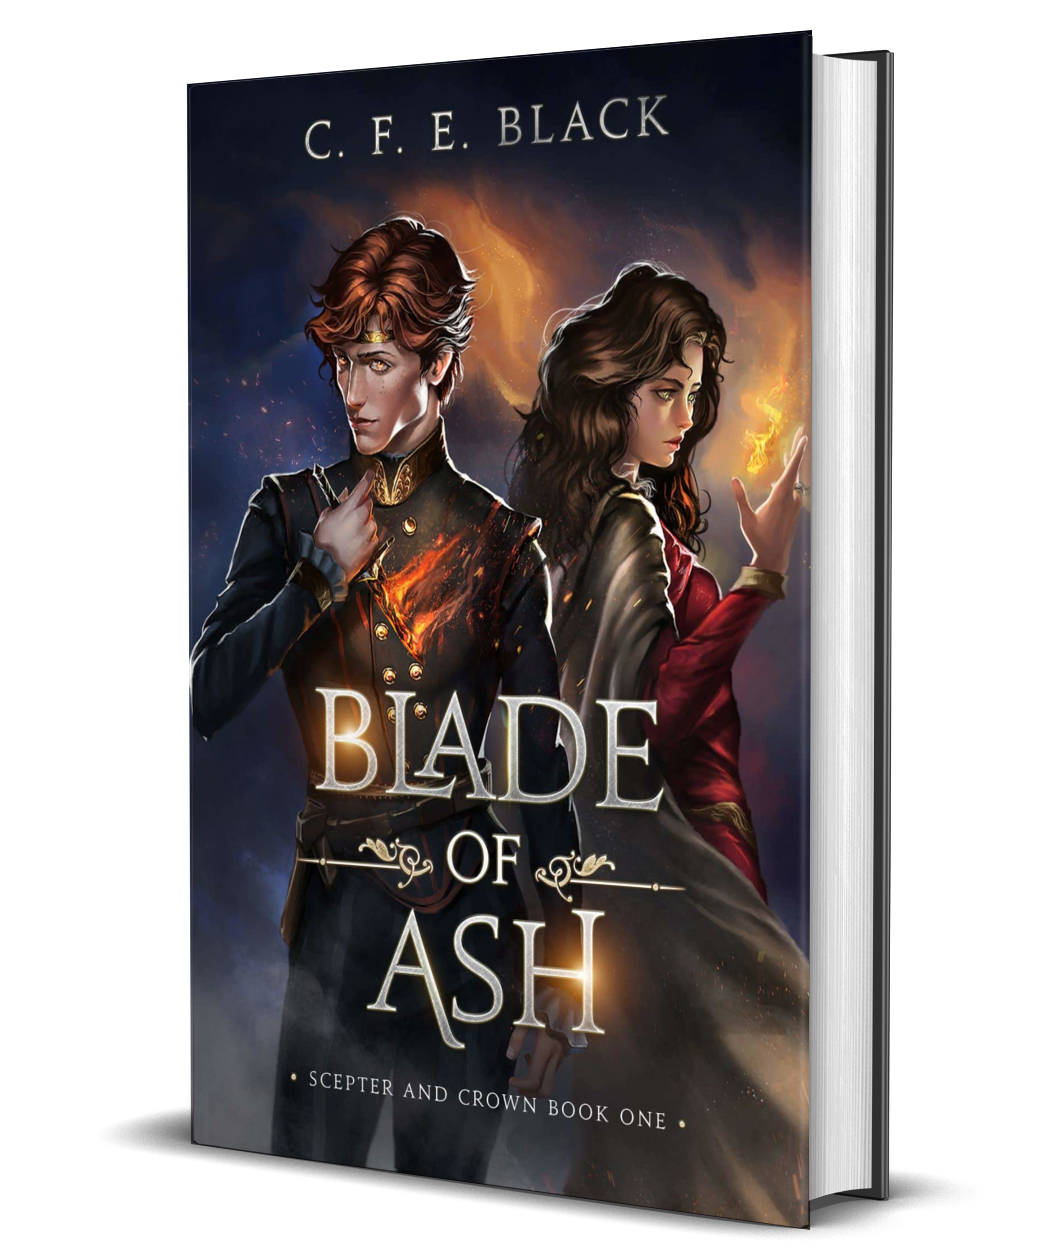 Blade of Ash Scepter and Crown Book 1 hardback cover